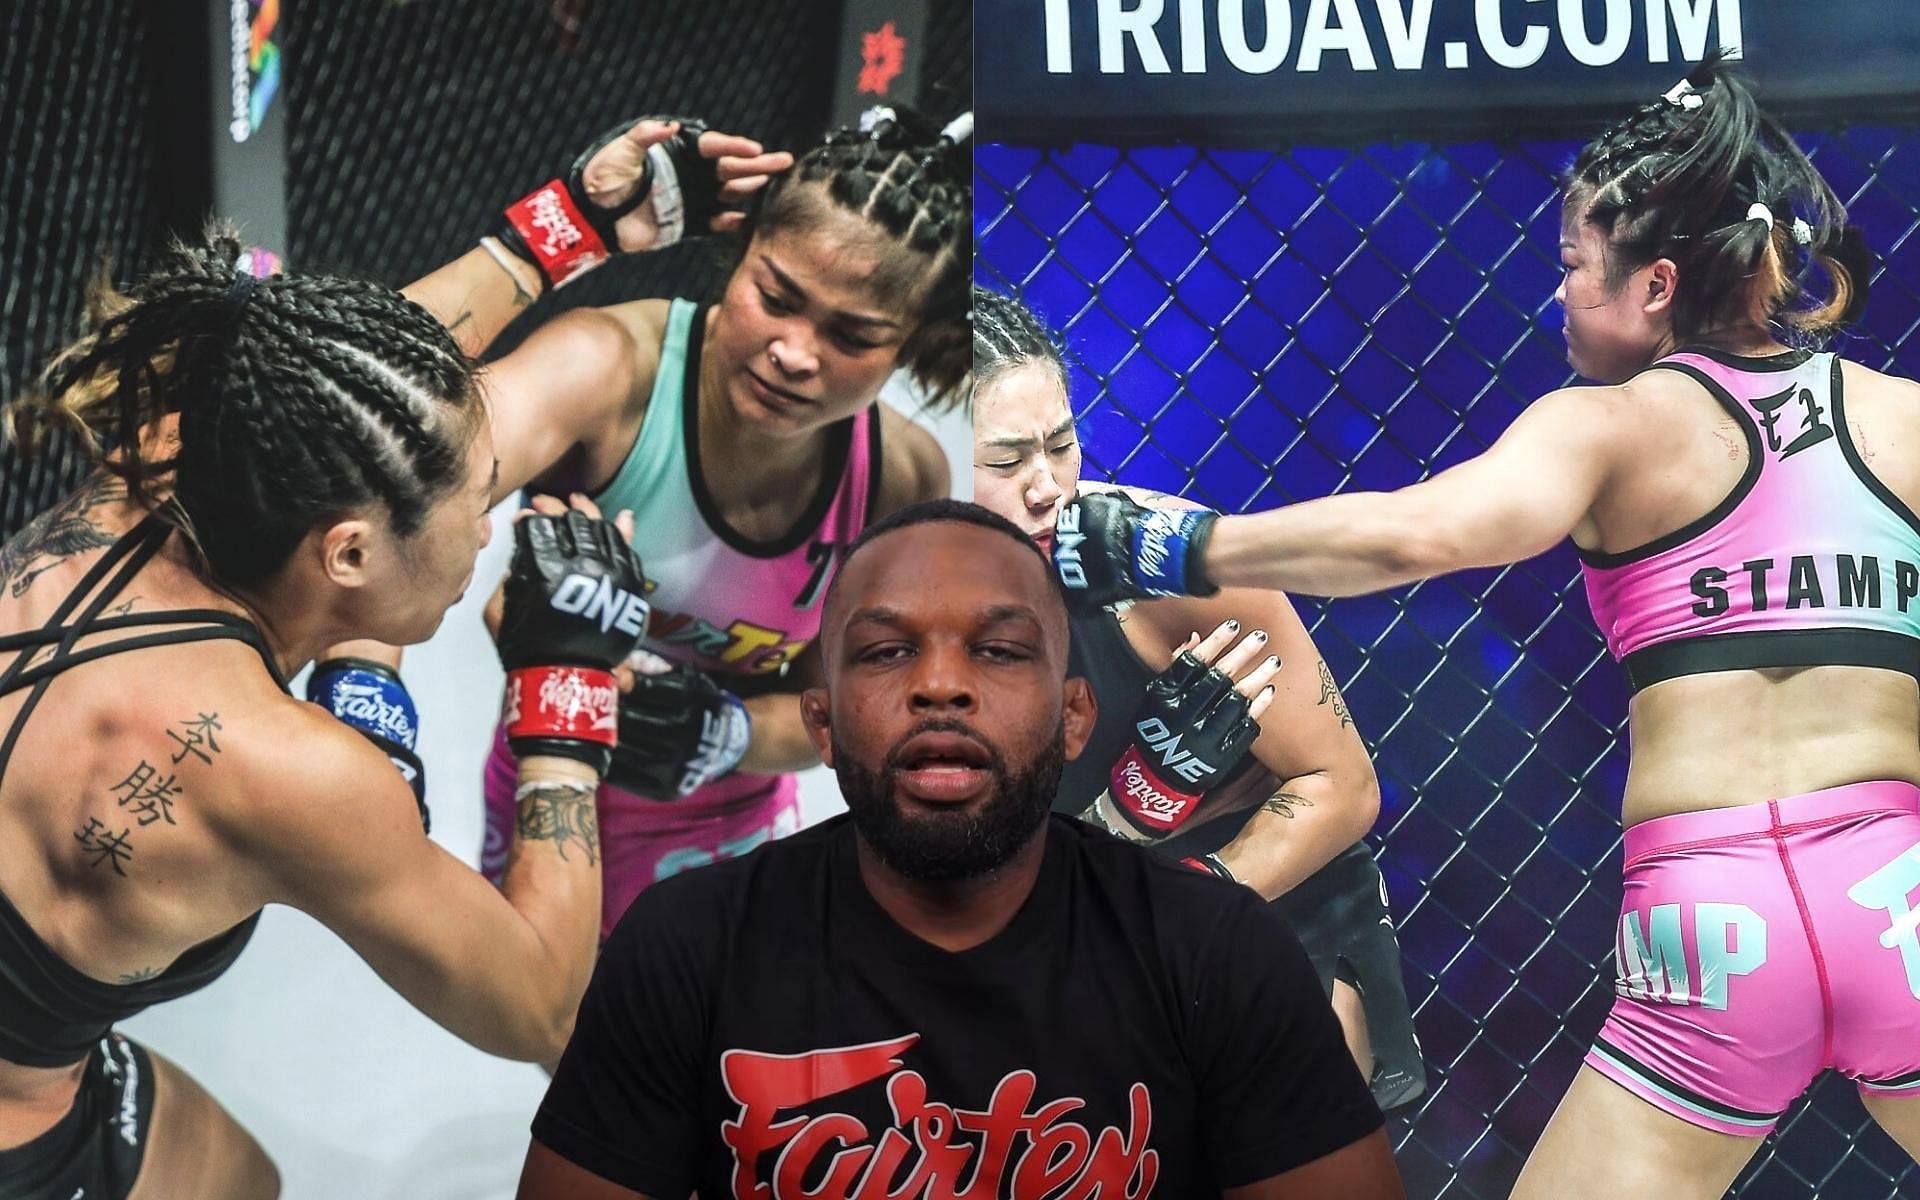 MMA Coach DJ Jackson of Fairtex Gym analyzes what Stamp needed to do to win a rematch against Angela Lee. (Images courtesy: ONE Championship, Fairtex Training Center&#039;s YouTube channel)